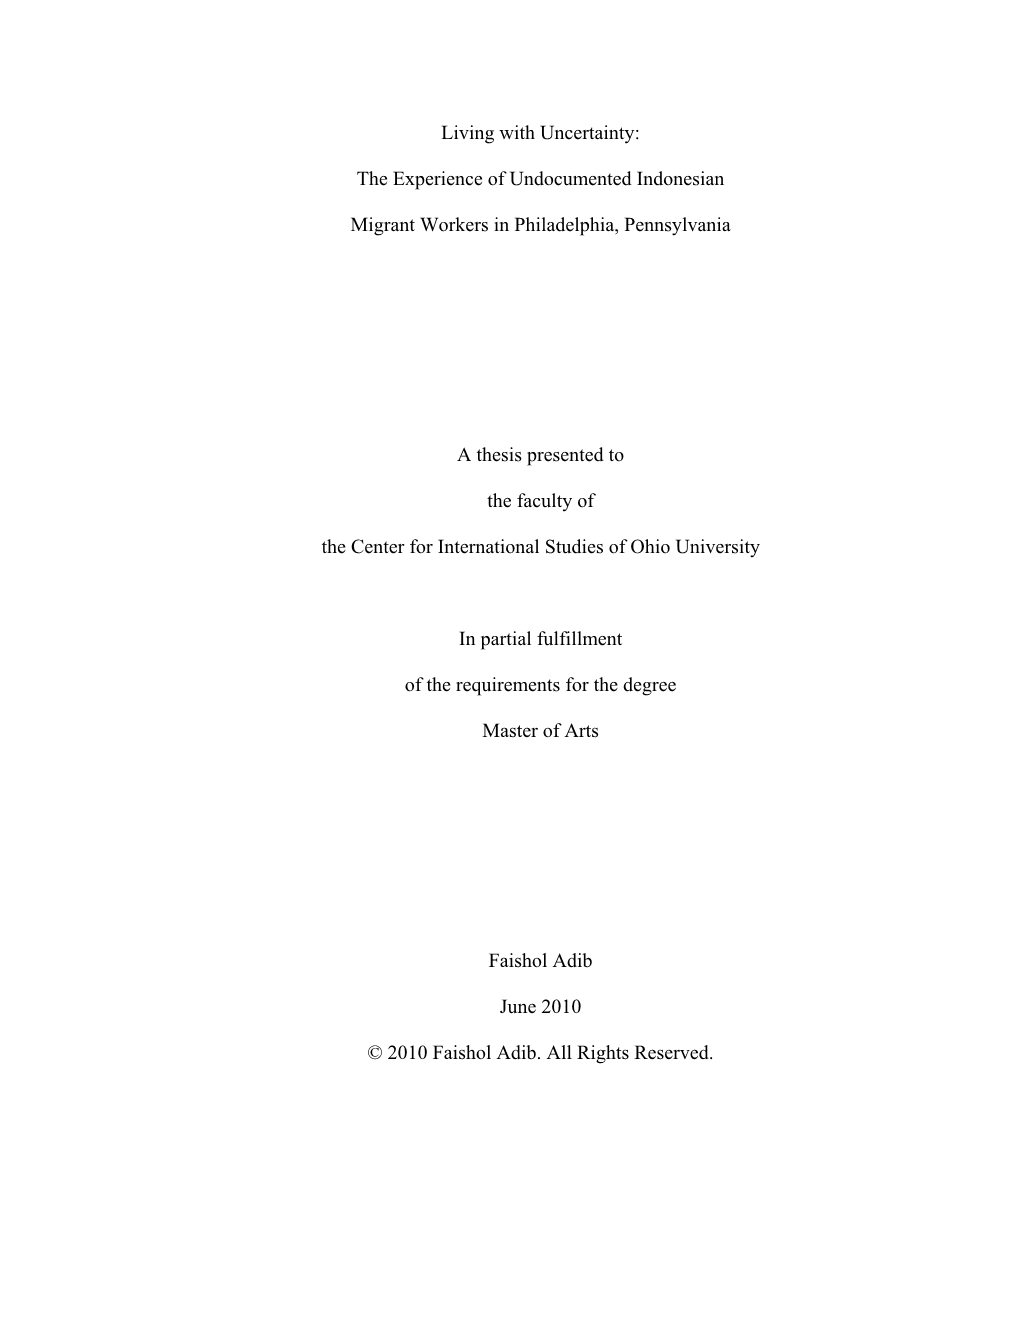 The Experience of Undocumented Indonesian Migrant Workers in Philadelphia, Pennsylvania a Thesis Prese